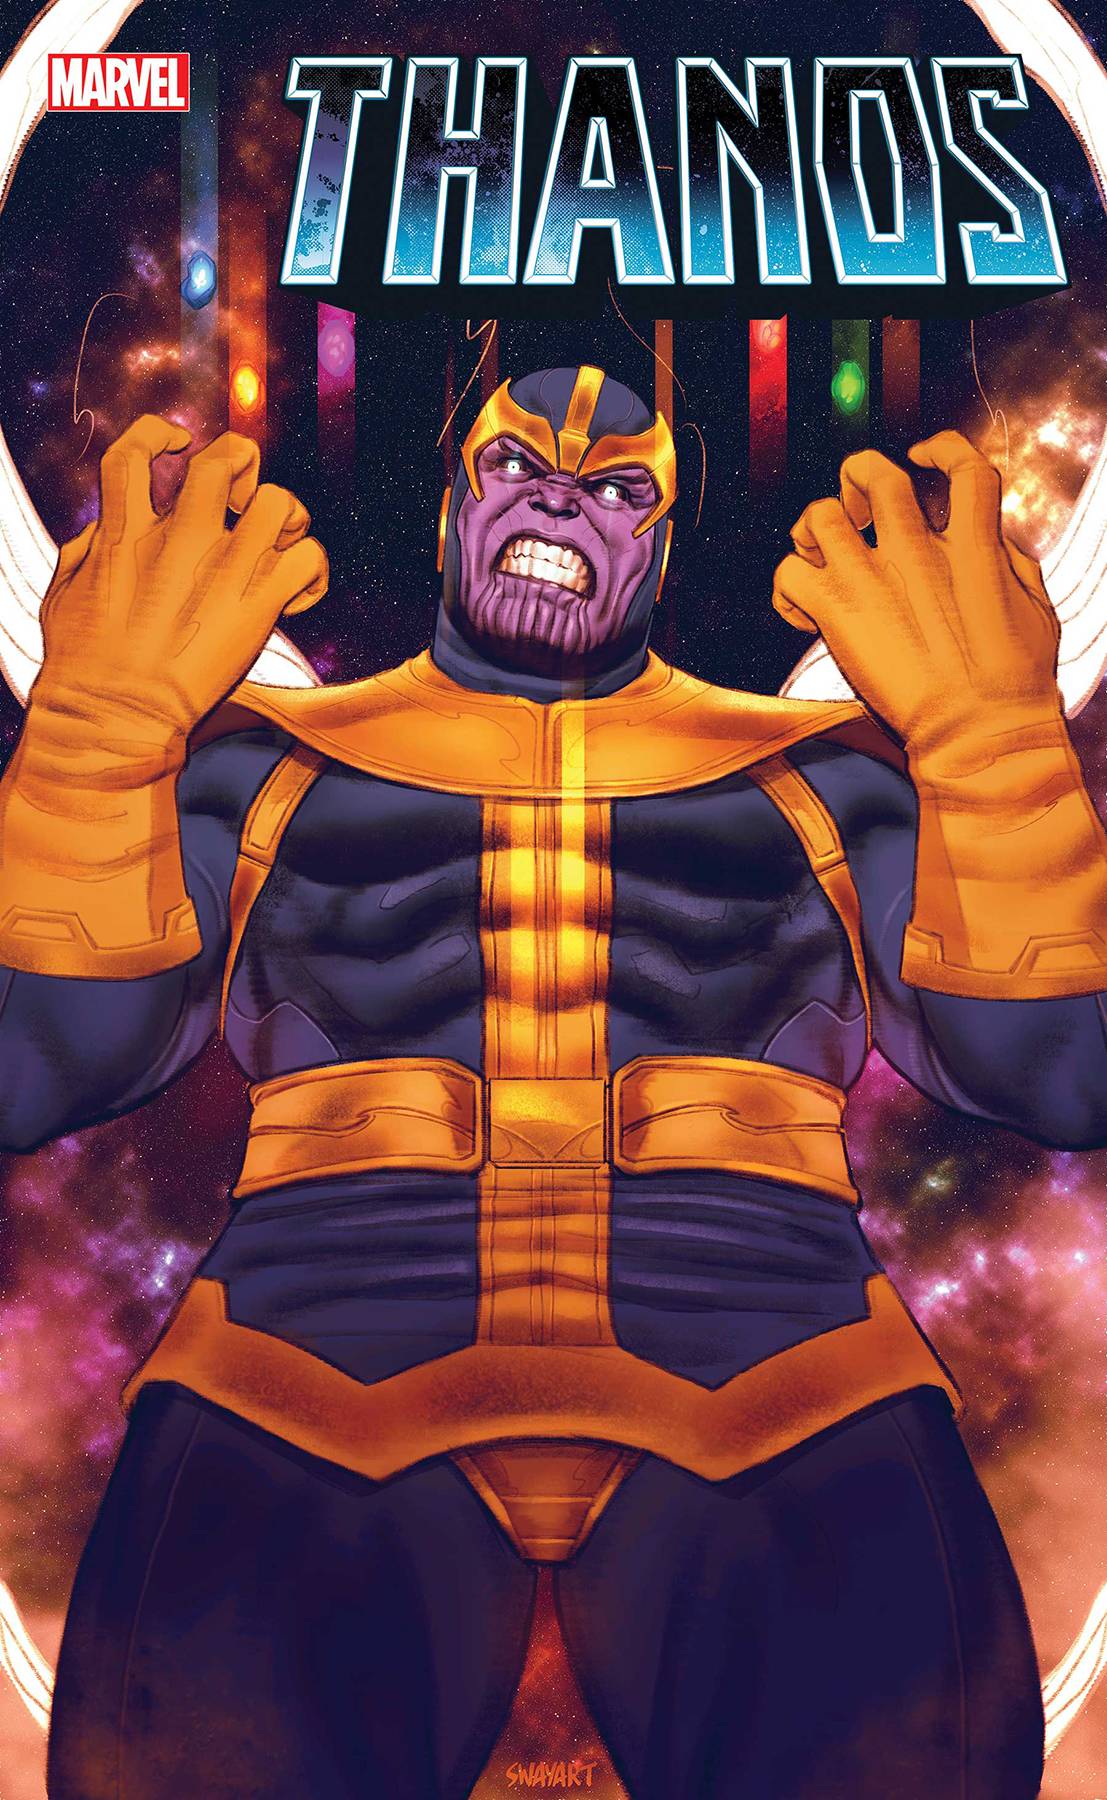 THANOS QUEST MARVEL TALES #1